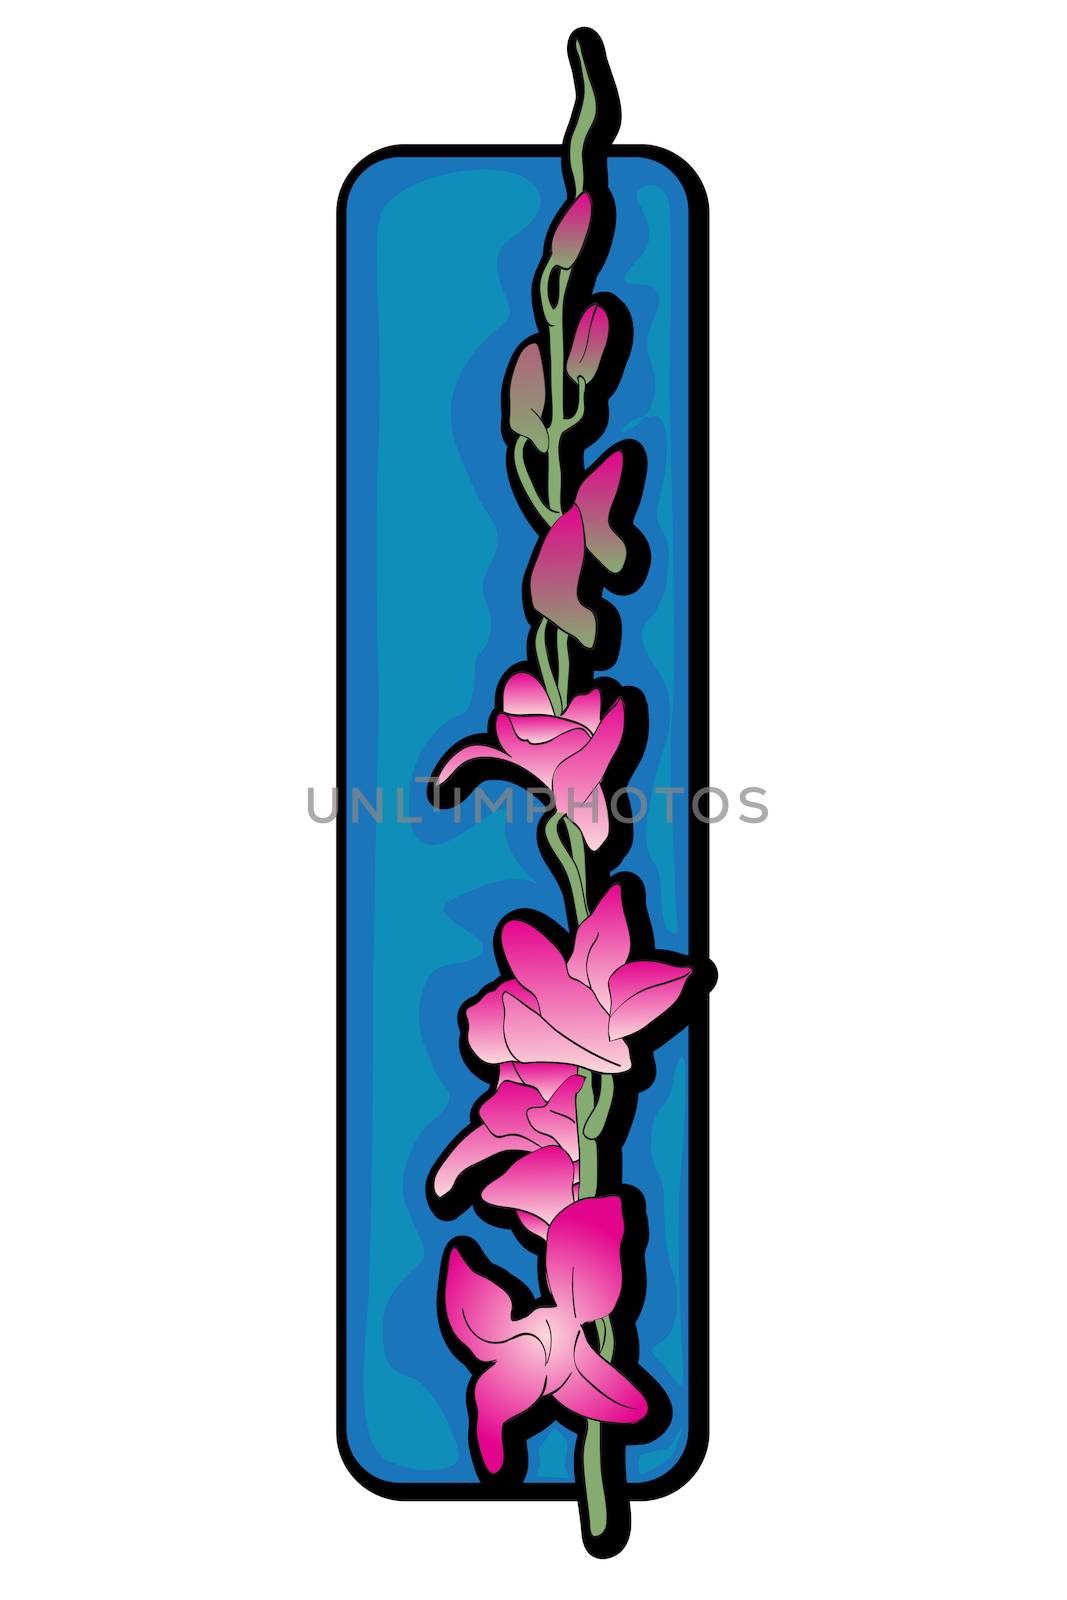 Long orchid clip art over blue label isolated on white